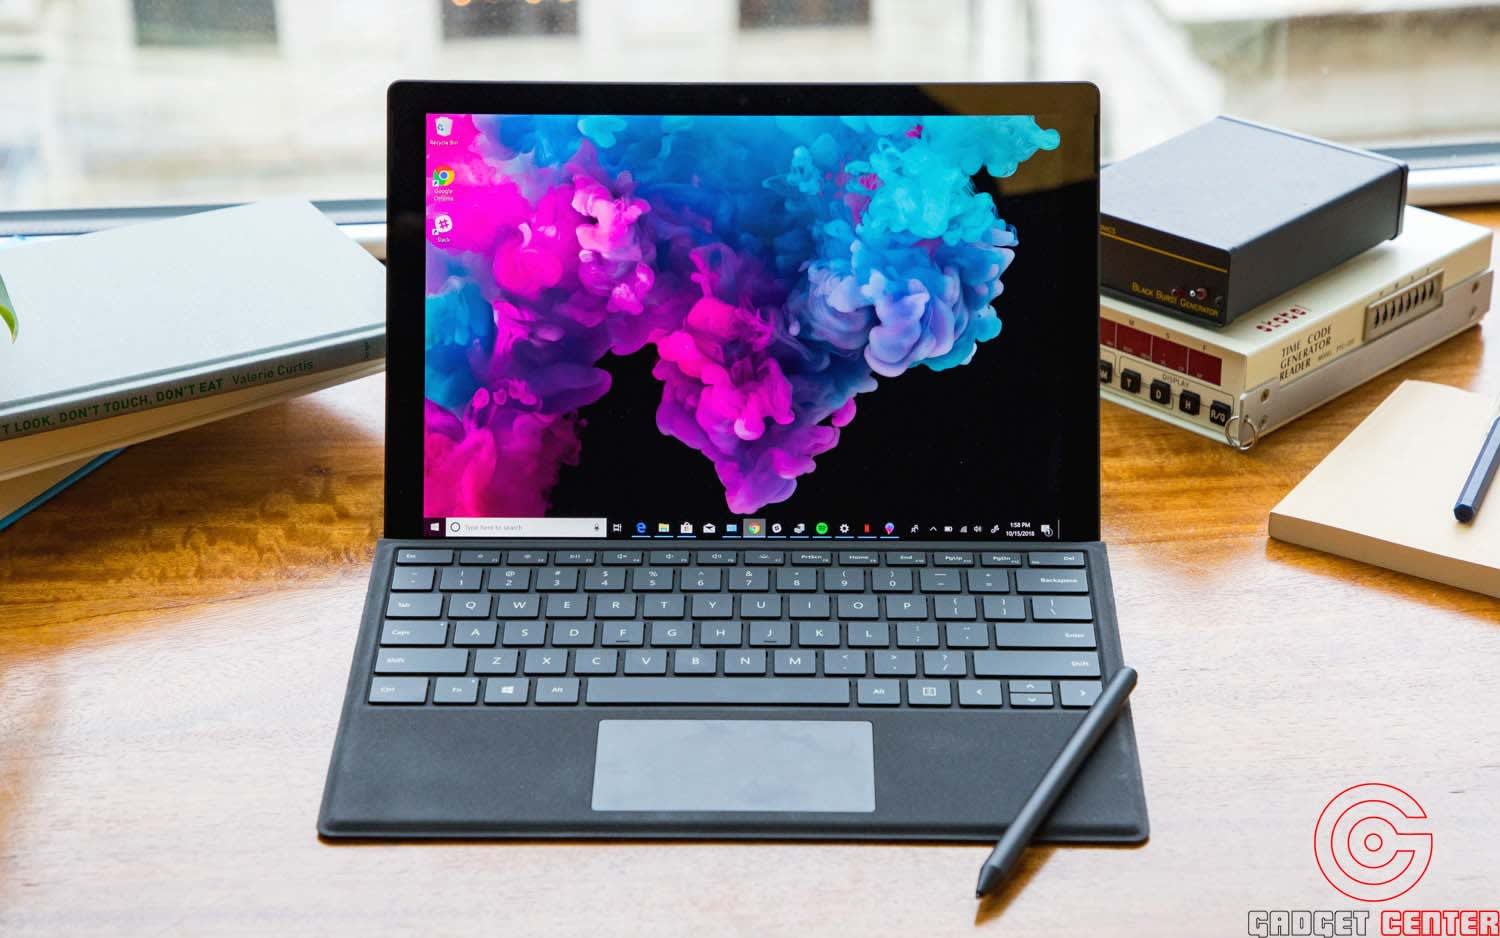 Microsoft Surface Pro 6 Review: Same Design But With More...